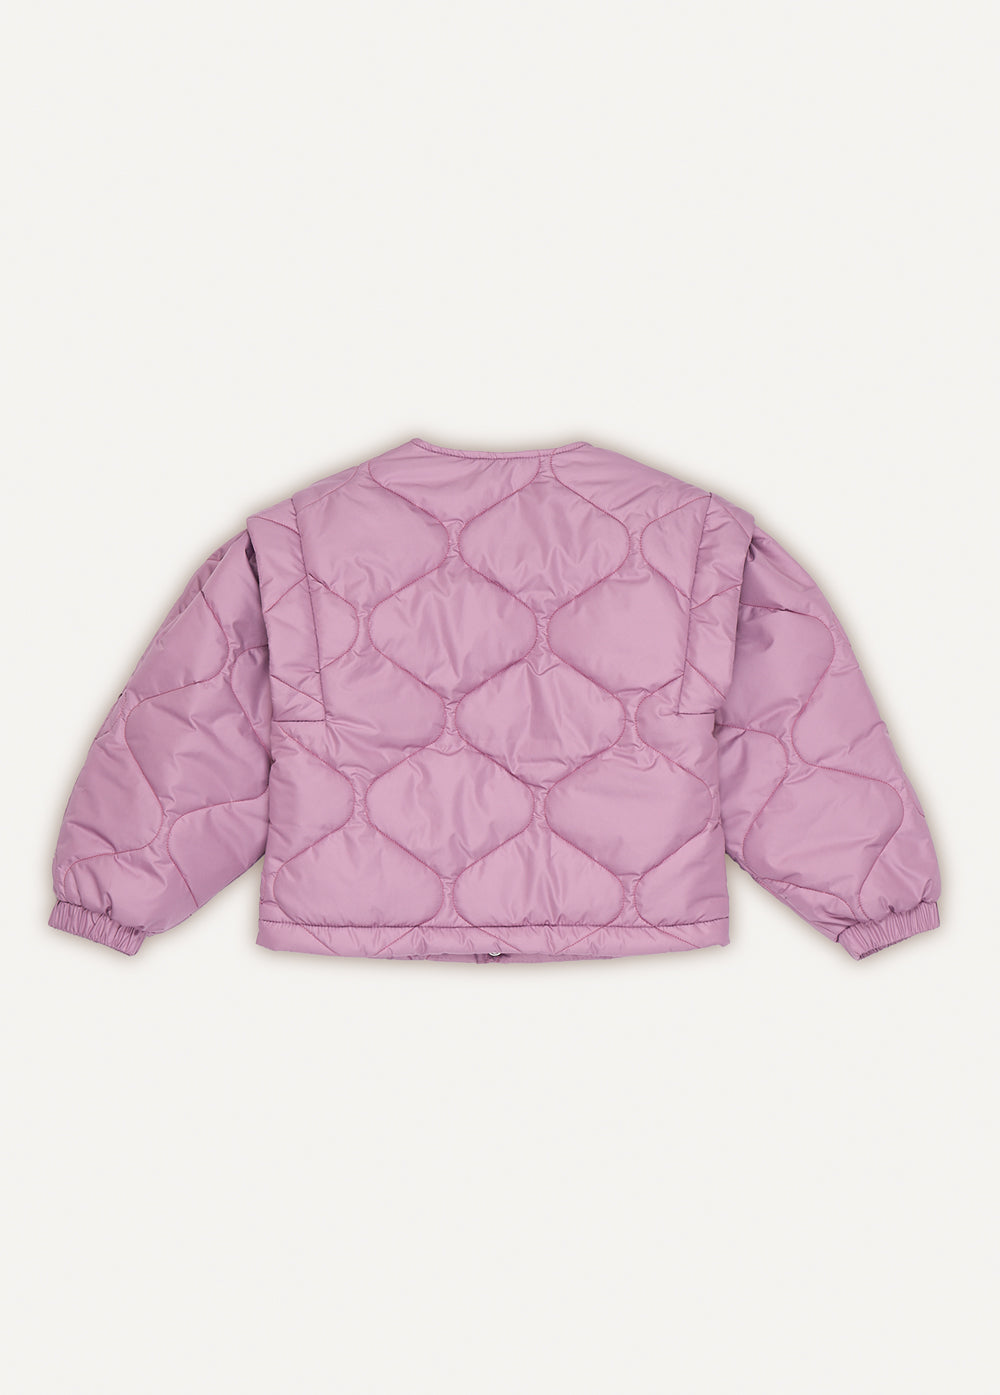 New Colette Jacket Dusty Orchid